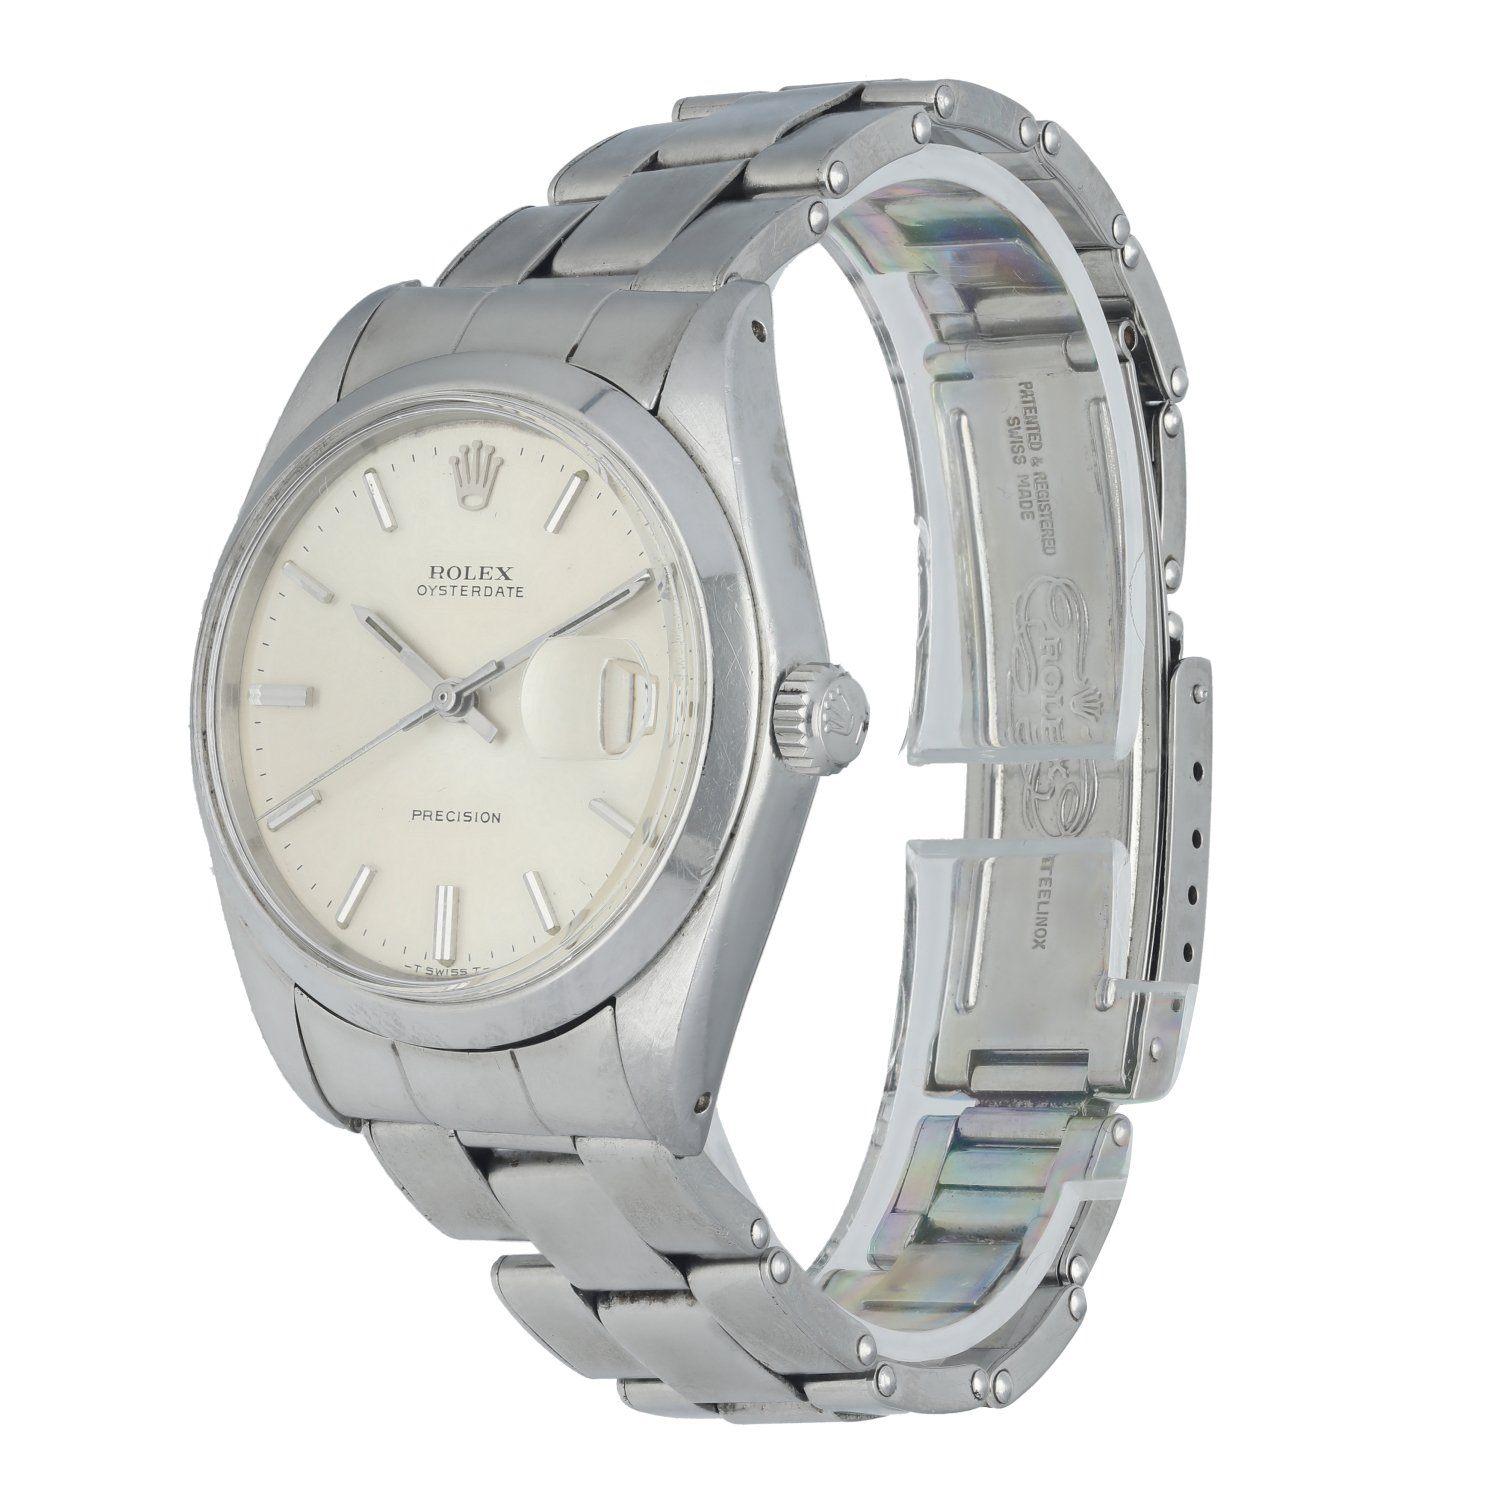 Rolex OysterDate Precision 6694 Vintage Men's Watch. 34mm stainless steel case with a smooth bezel. Silver dial with silver-tone hands and indexes. Minute markers on the outer dial. Date Display at the 3 o'clock position. Vintage rivet stainless